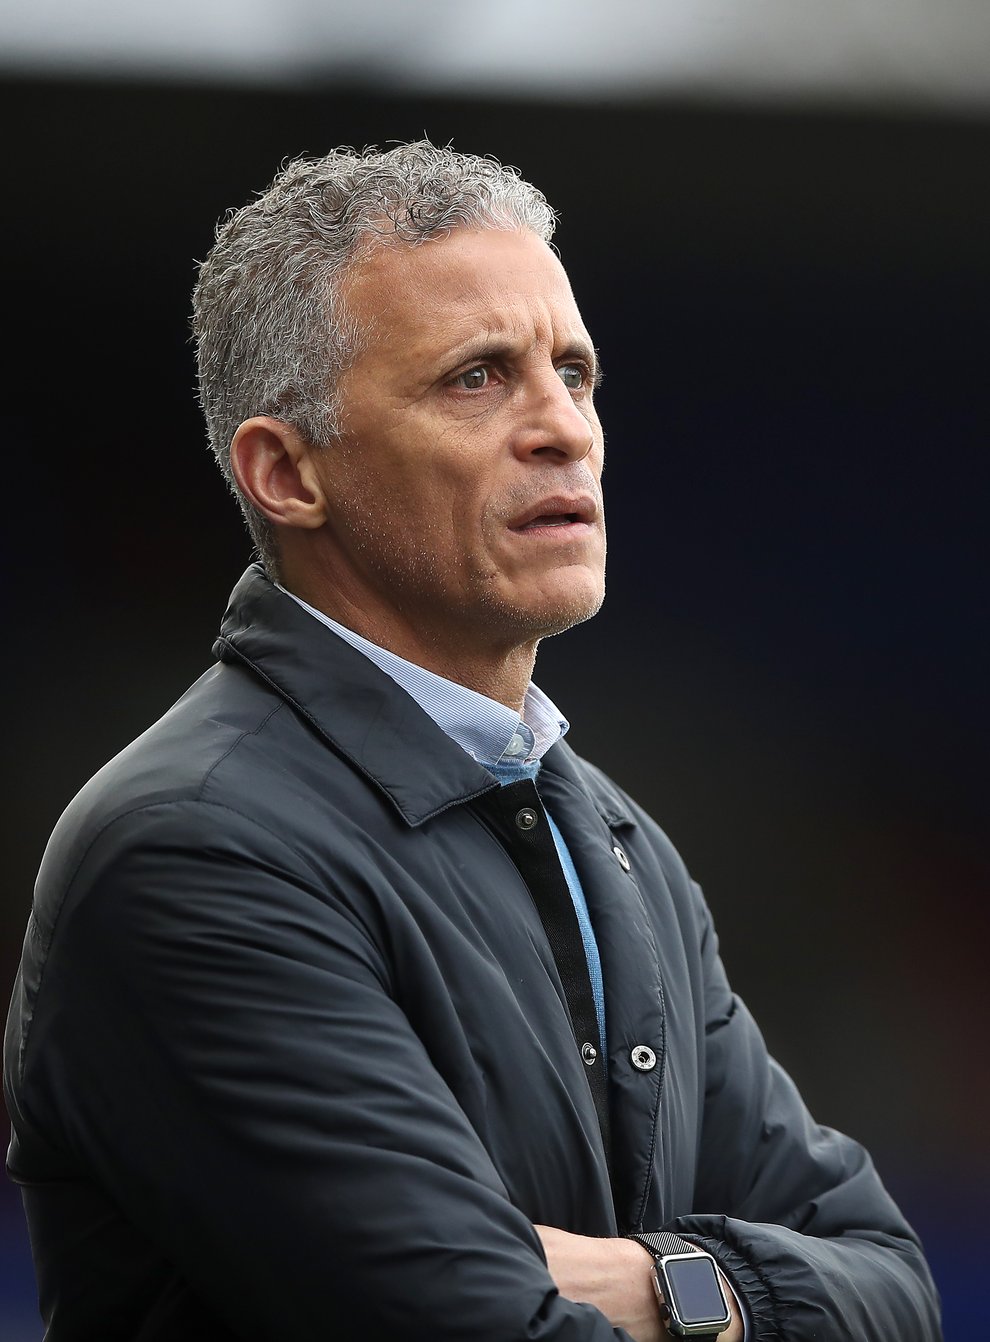 Keith Curle will take charge of the team for the first time against the Gills (Martin Rickett/PA)